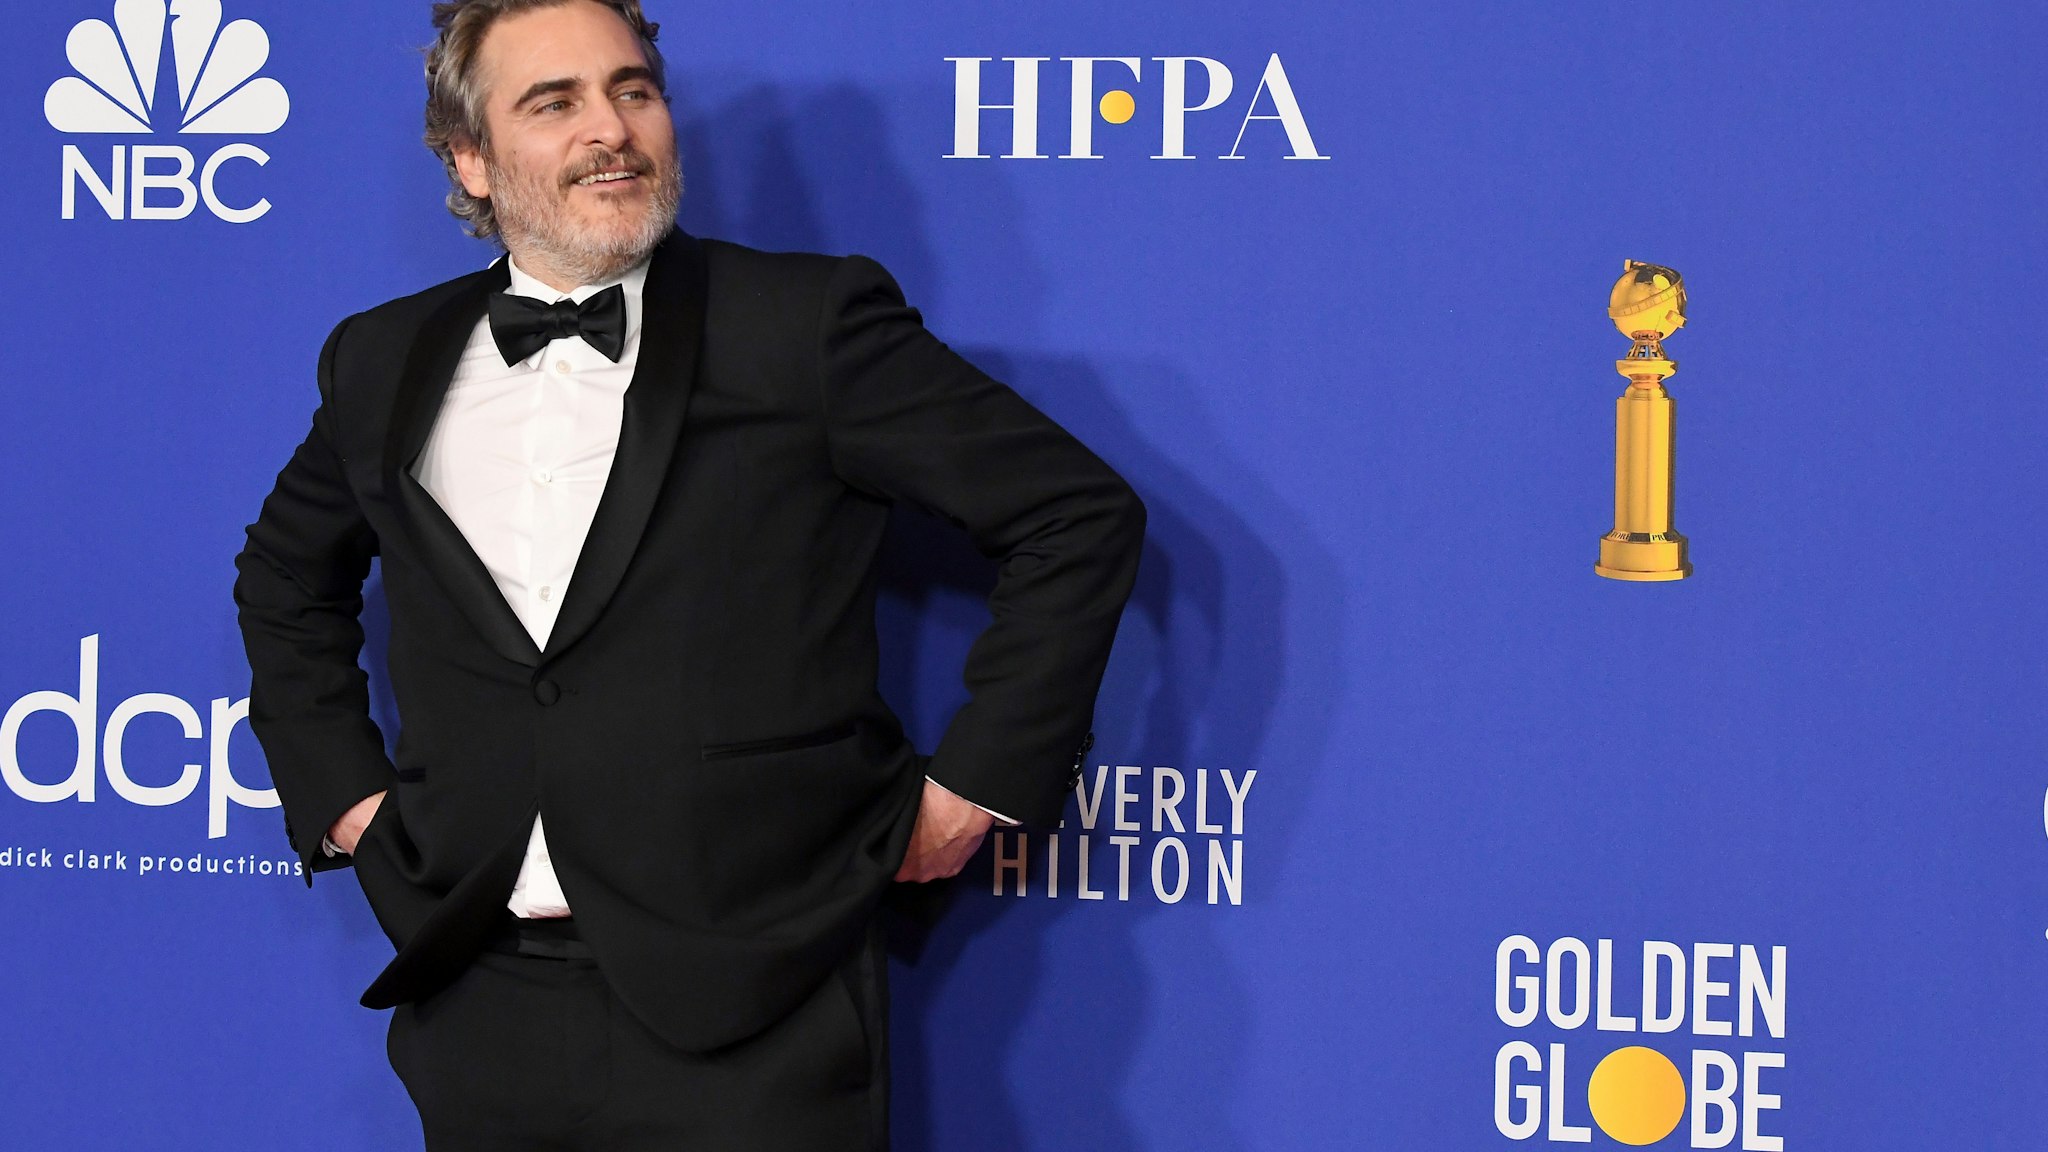 BEVERLY HILLS, CALIFORNIA - JANUARY 05: Joaquin Phoenix poses in the press room during the 77th Annual Golden Globe Awards at The Beverly Hilton Hotel on January 05, 2020 in Beverly Hills, California. (Photo by Steve Granitz/WireImage,)